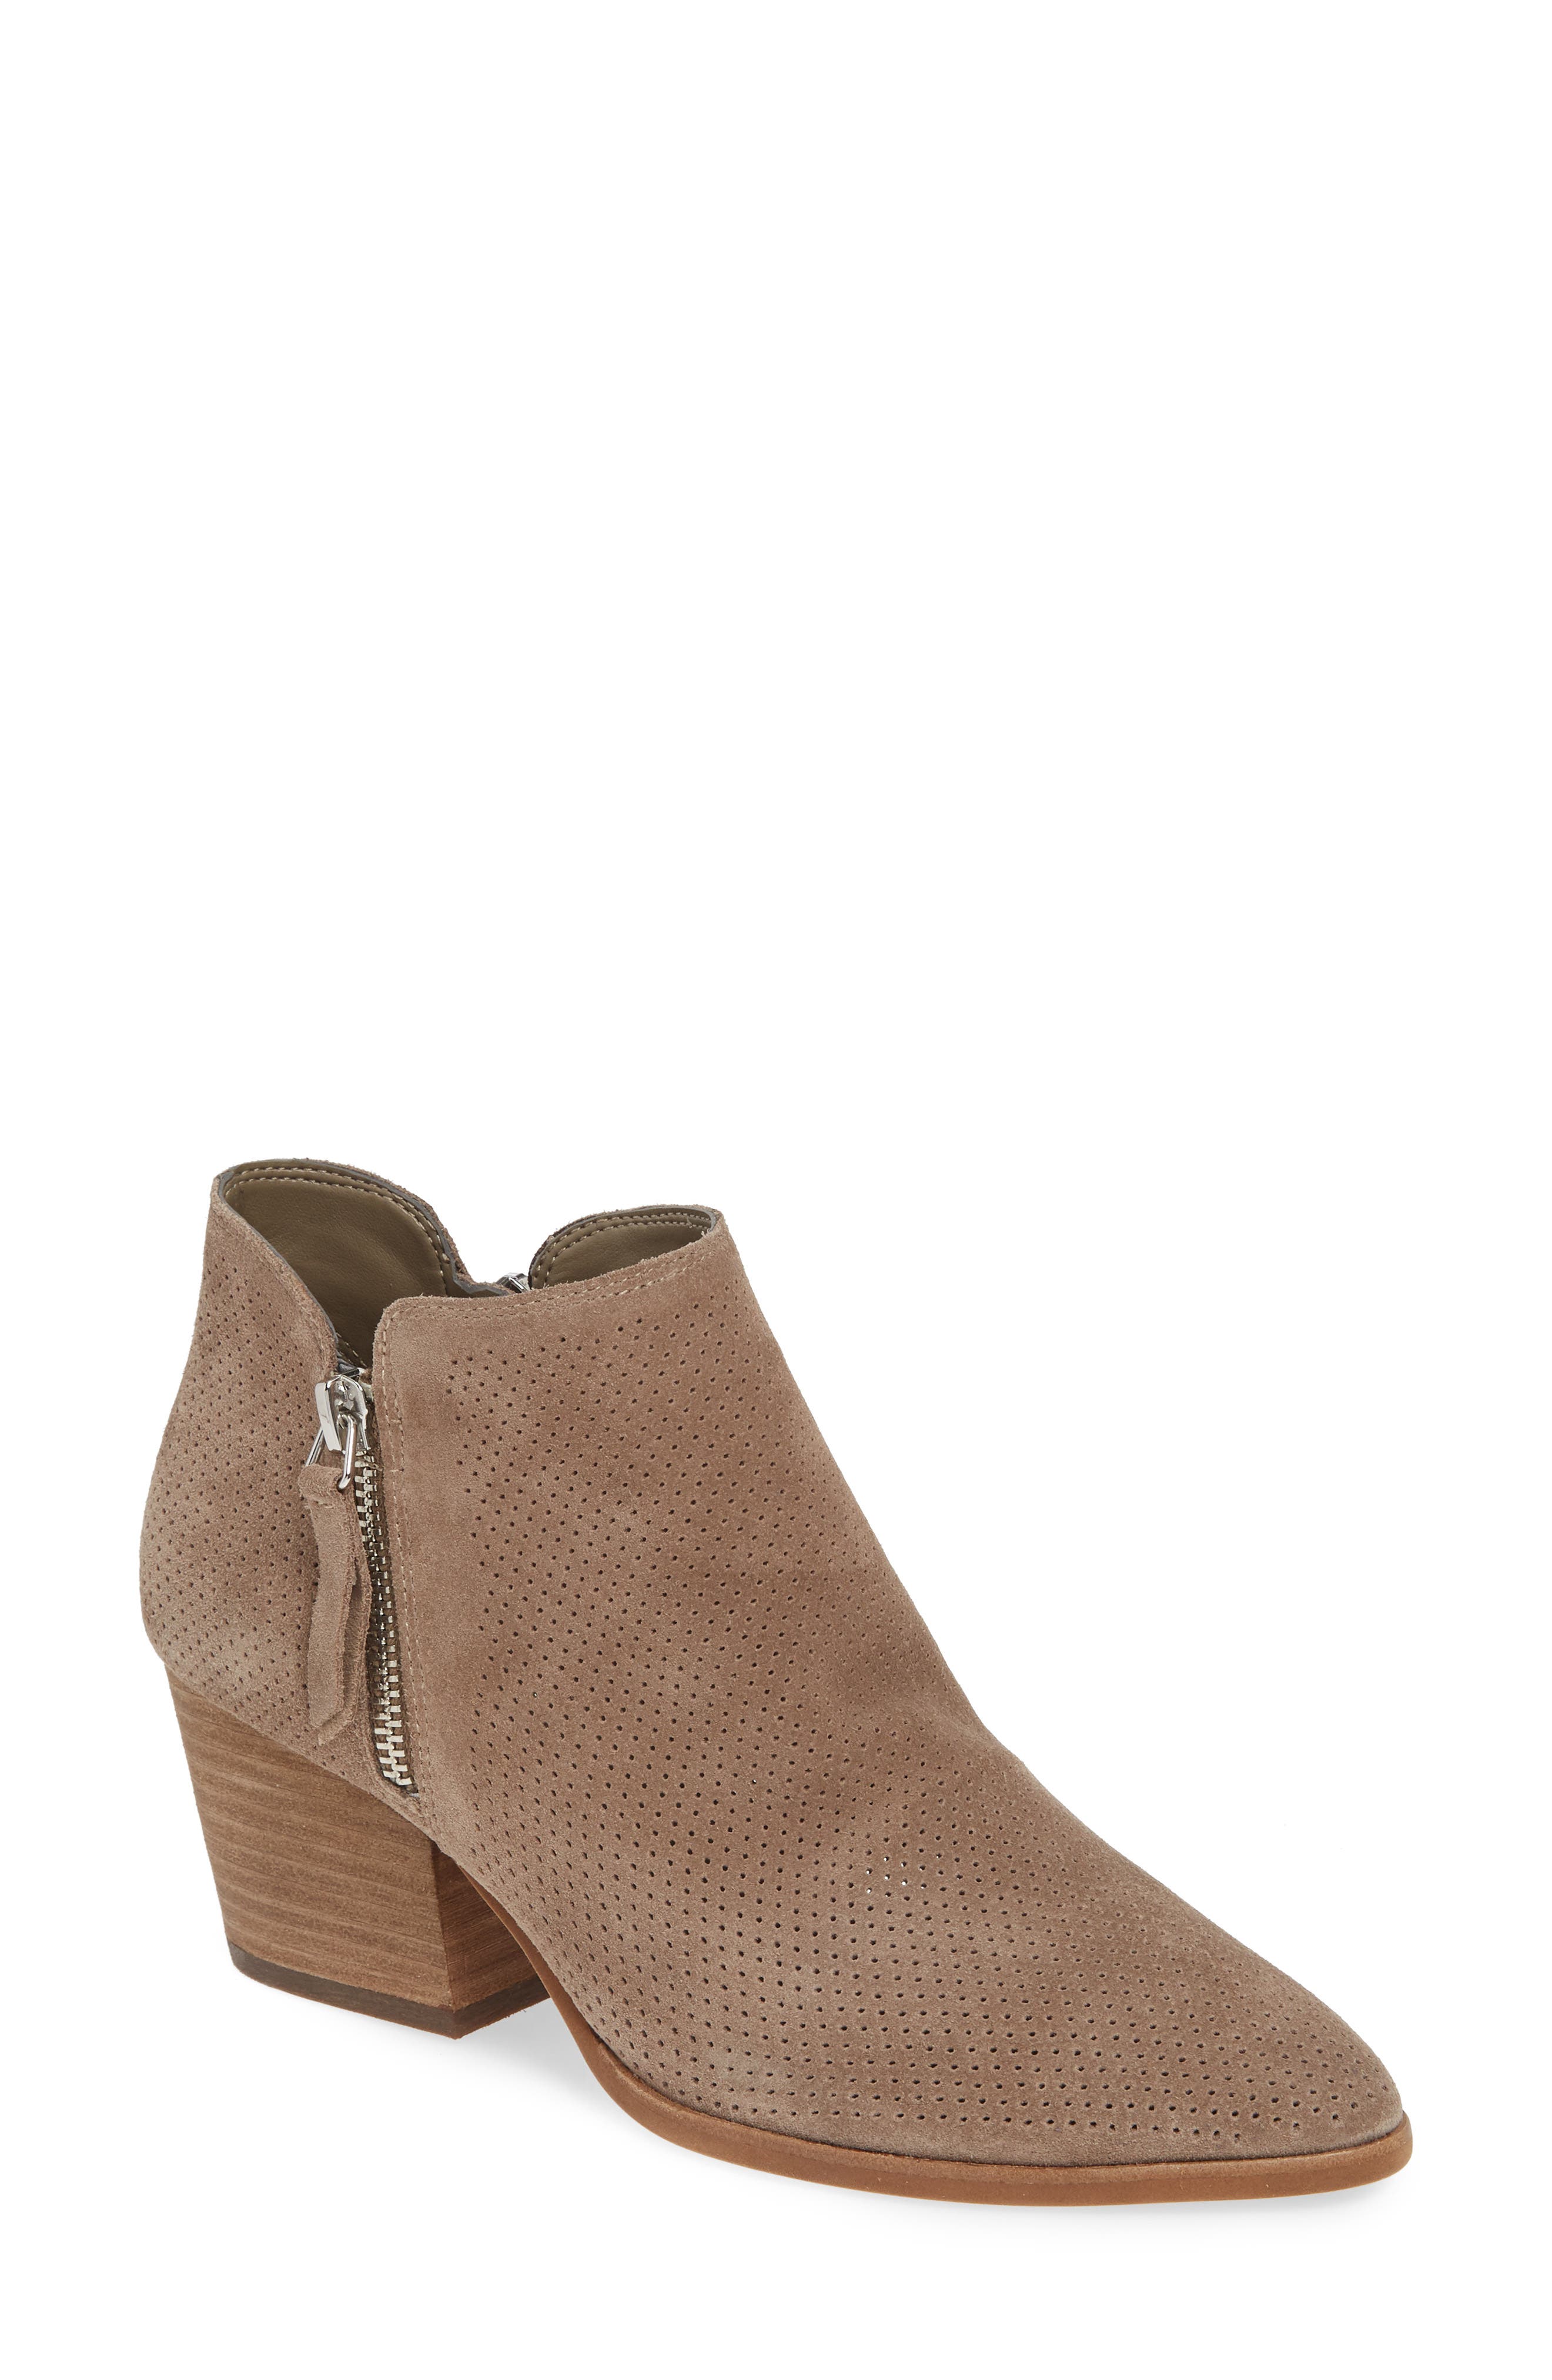 Vince Camuto Nethera Perforated Bootie 